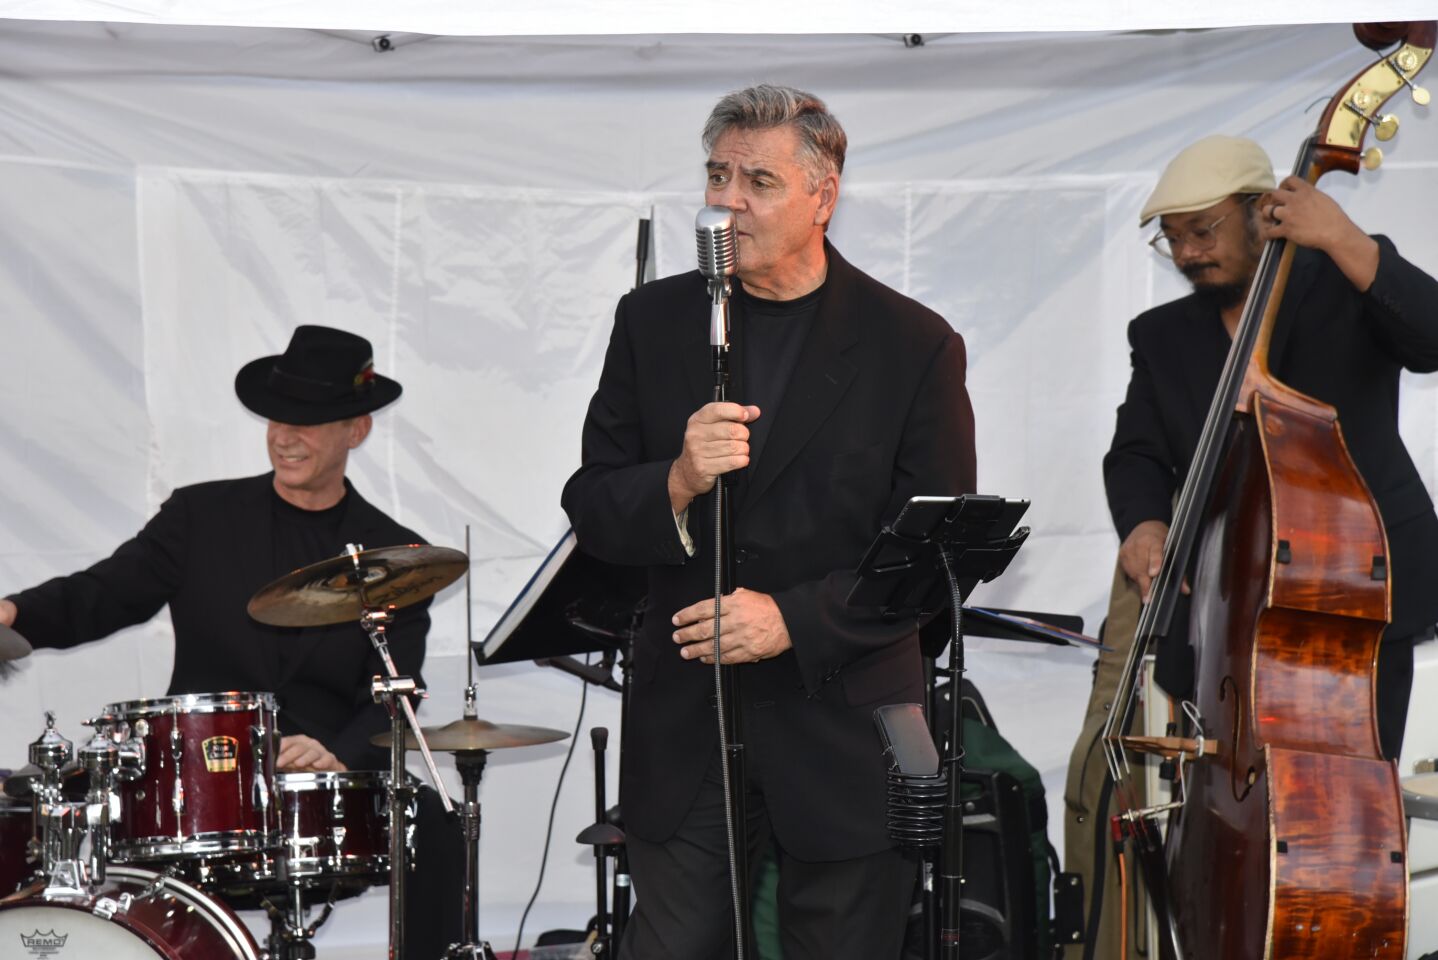 KUSI Broadcast Meteorologist/Feature Reporter Dave Scott and band performed the classics